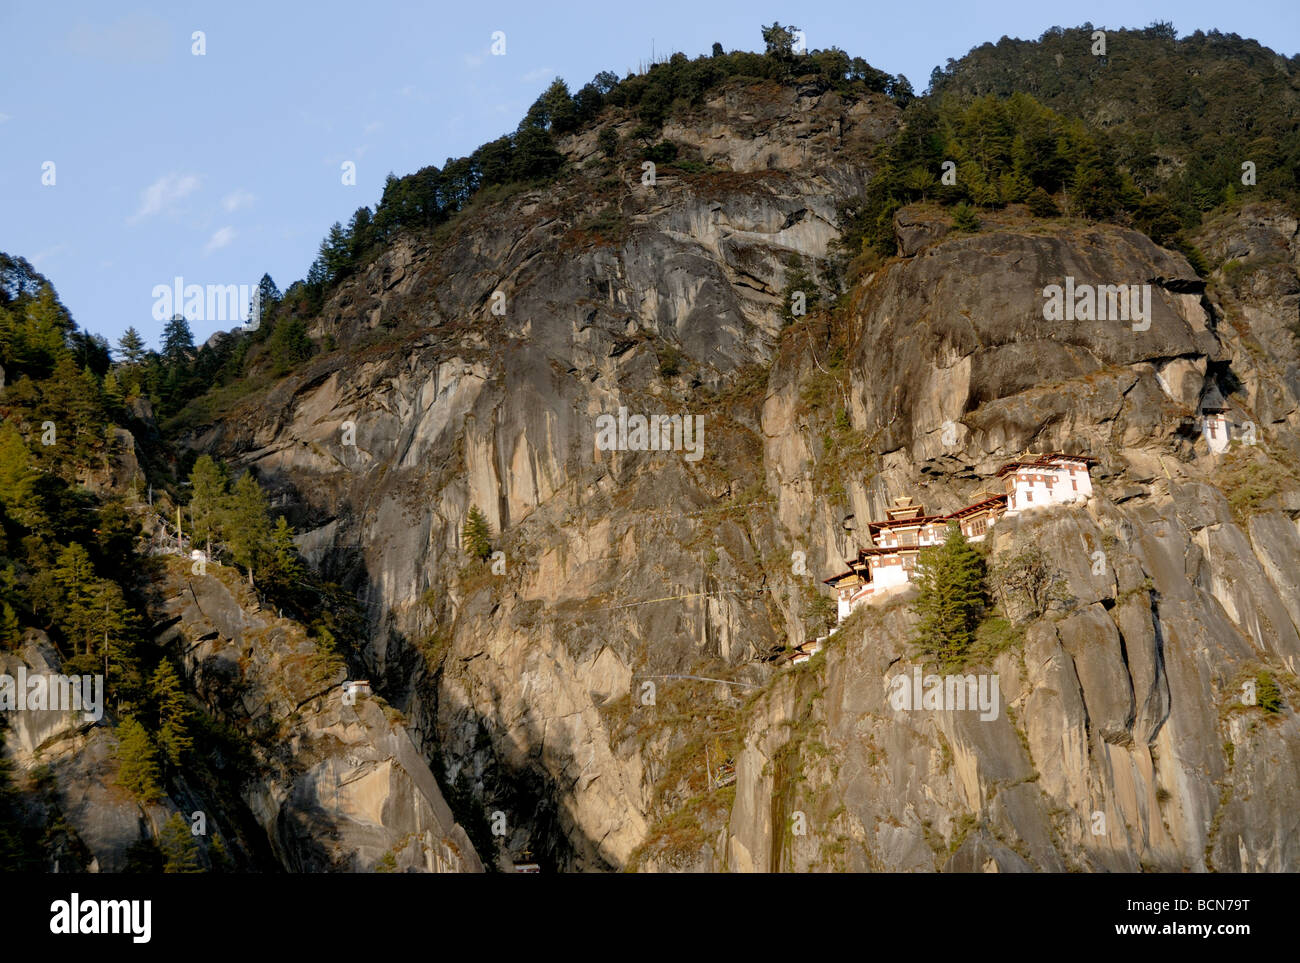 Paro Taktsang Goemba, monastery, know as the  Tigers Nest is perched precariously half way up a mountain side cliff. Stock Photo